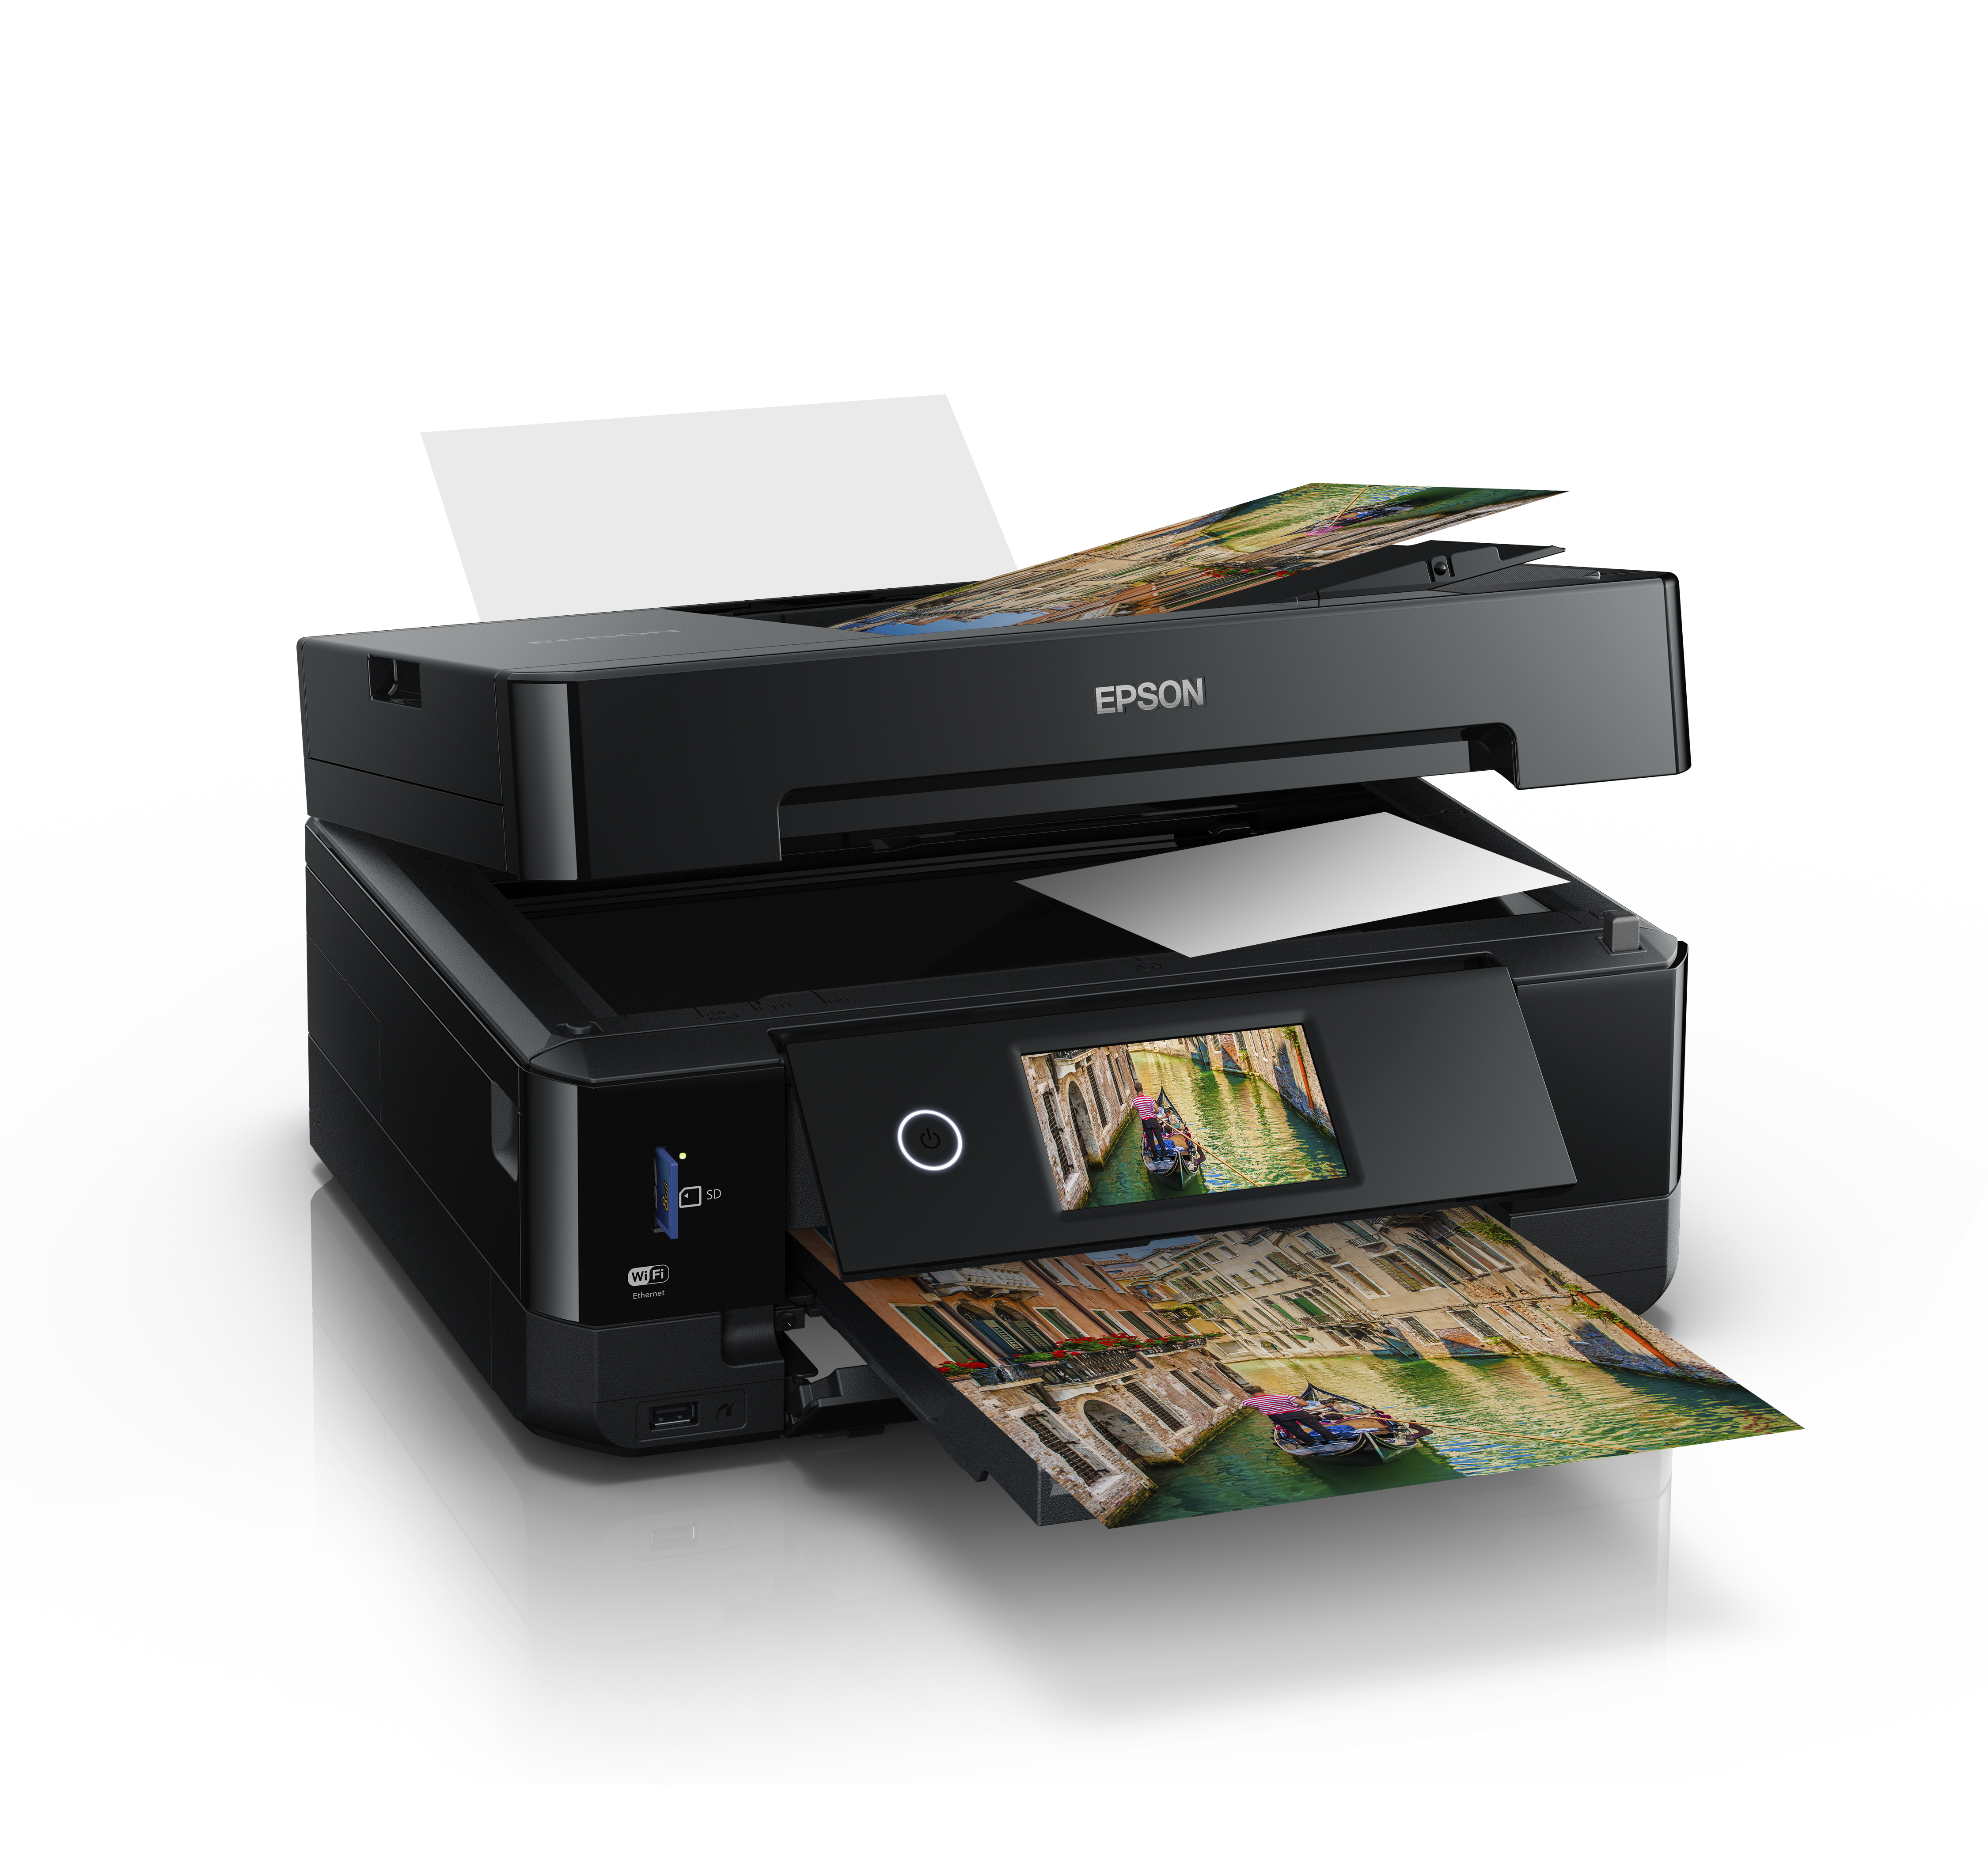 Epson Expression Premium XP-7100 Small-in-One - Multifunktionsdrucker - Farbe - Tintenstrahl - Legal (216 x 356 mm)